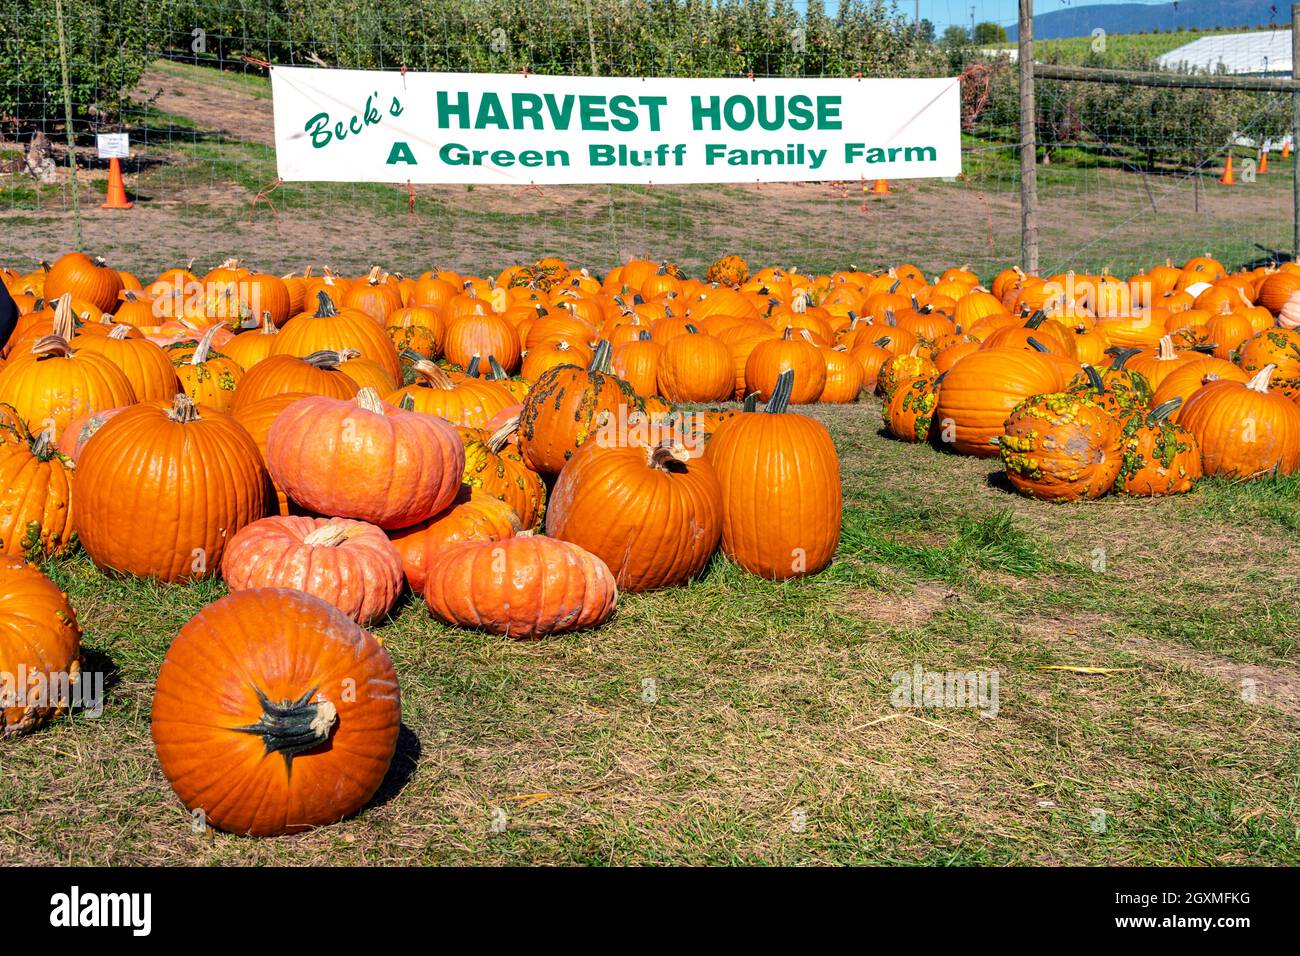 Families search for pumpkins at an October Fall Harvest Festival in Green Bluff, a suburb of Spokane Washington, USA. Stock Photo